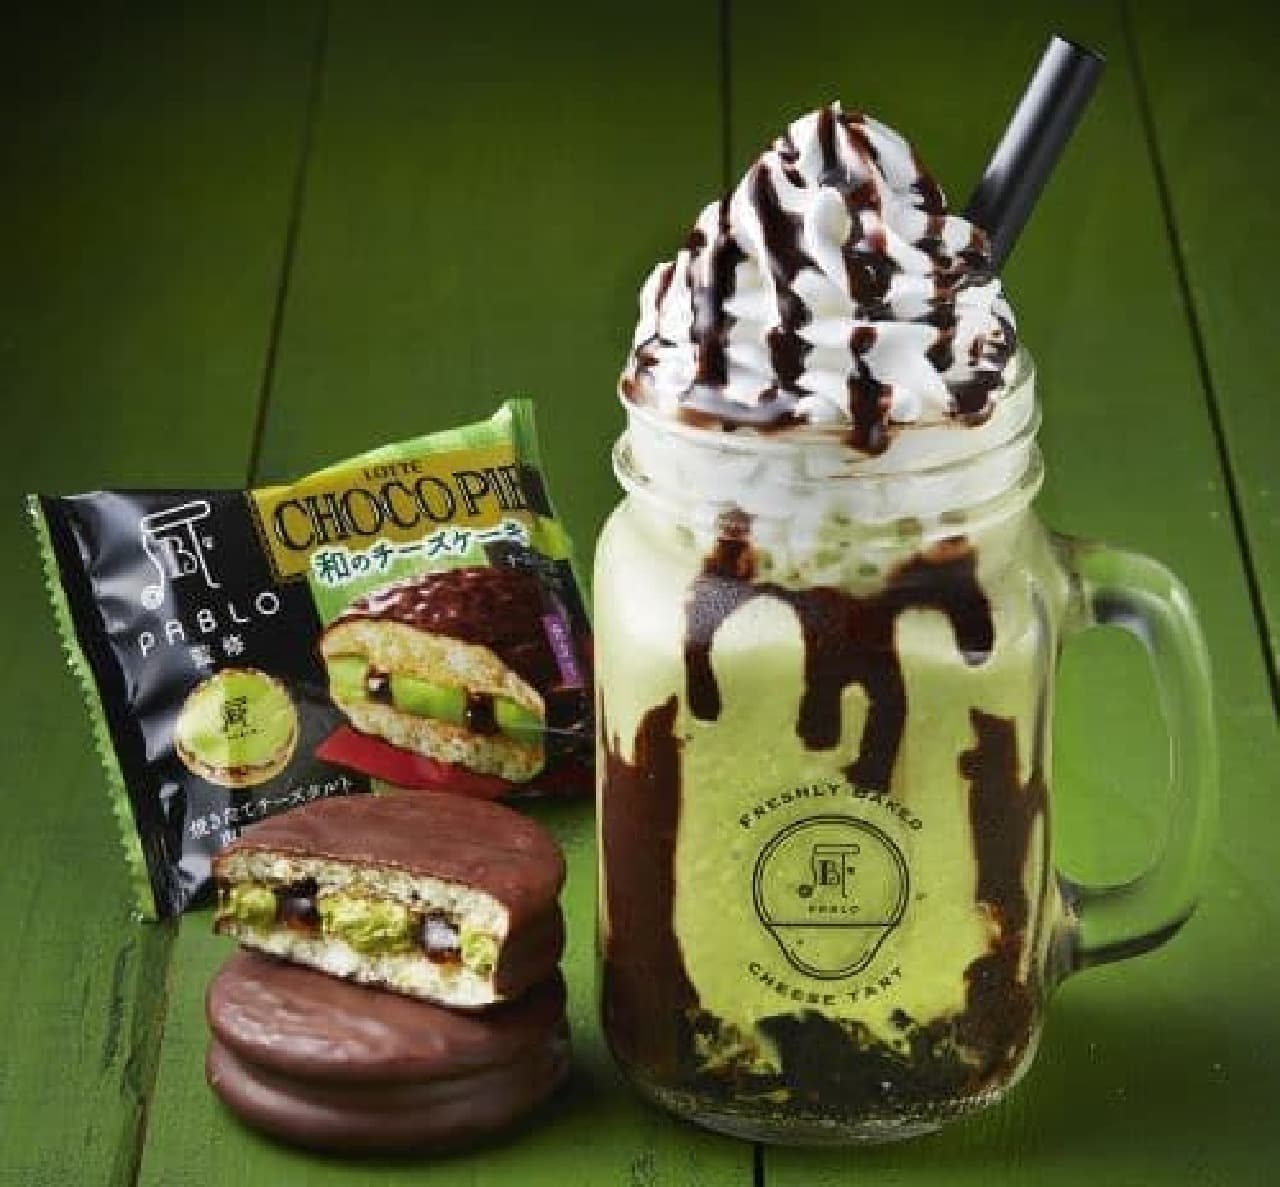 Pablo Smoothie [Lotte Japanese Choco Pie Tailoring] Matcha and black honey jelly are supervised by PABLO Japanese cheesecake Kyomi tailored drink